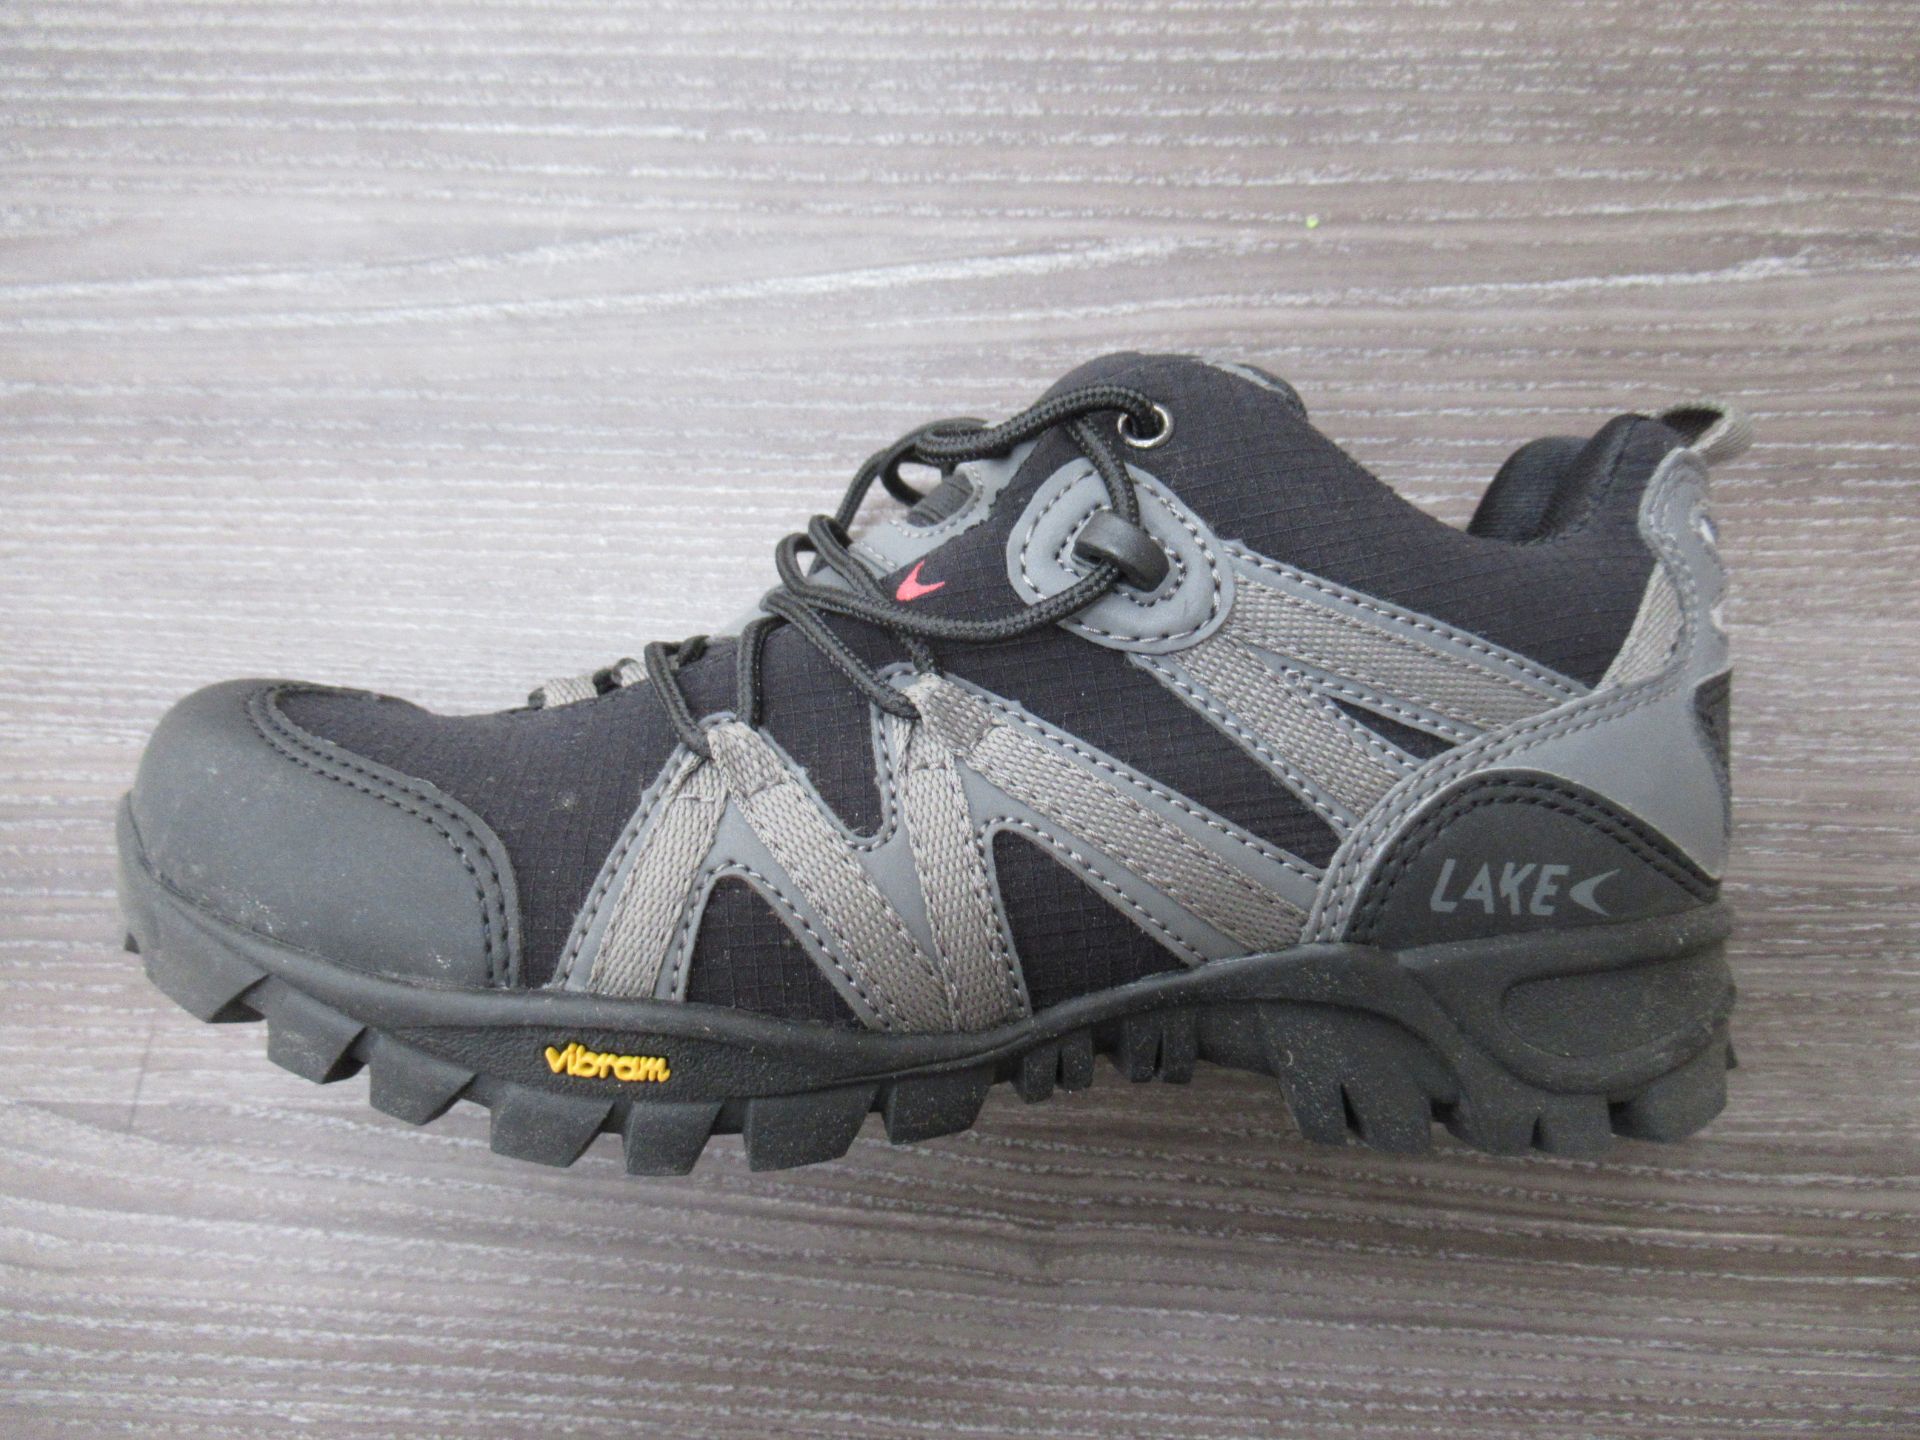 2 x Pairs of ladies cycling shoes: 1 x Lake MX100-W EU size 37 (RRP£79.99) and 1 x Pearl Izumi W Sel - Image 4 of 7